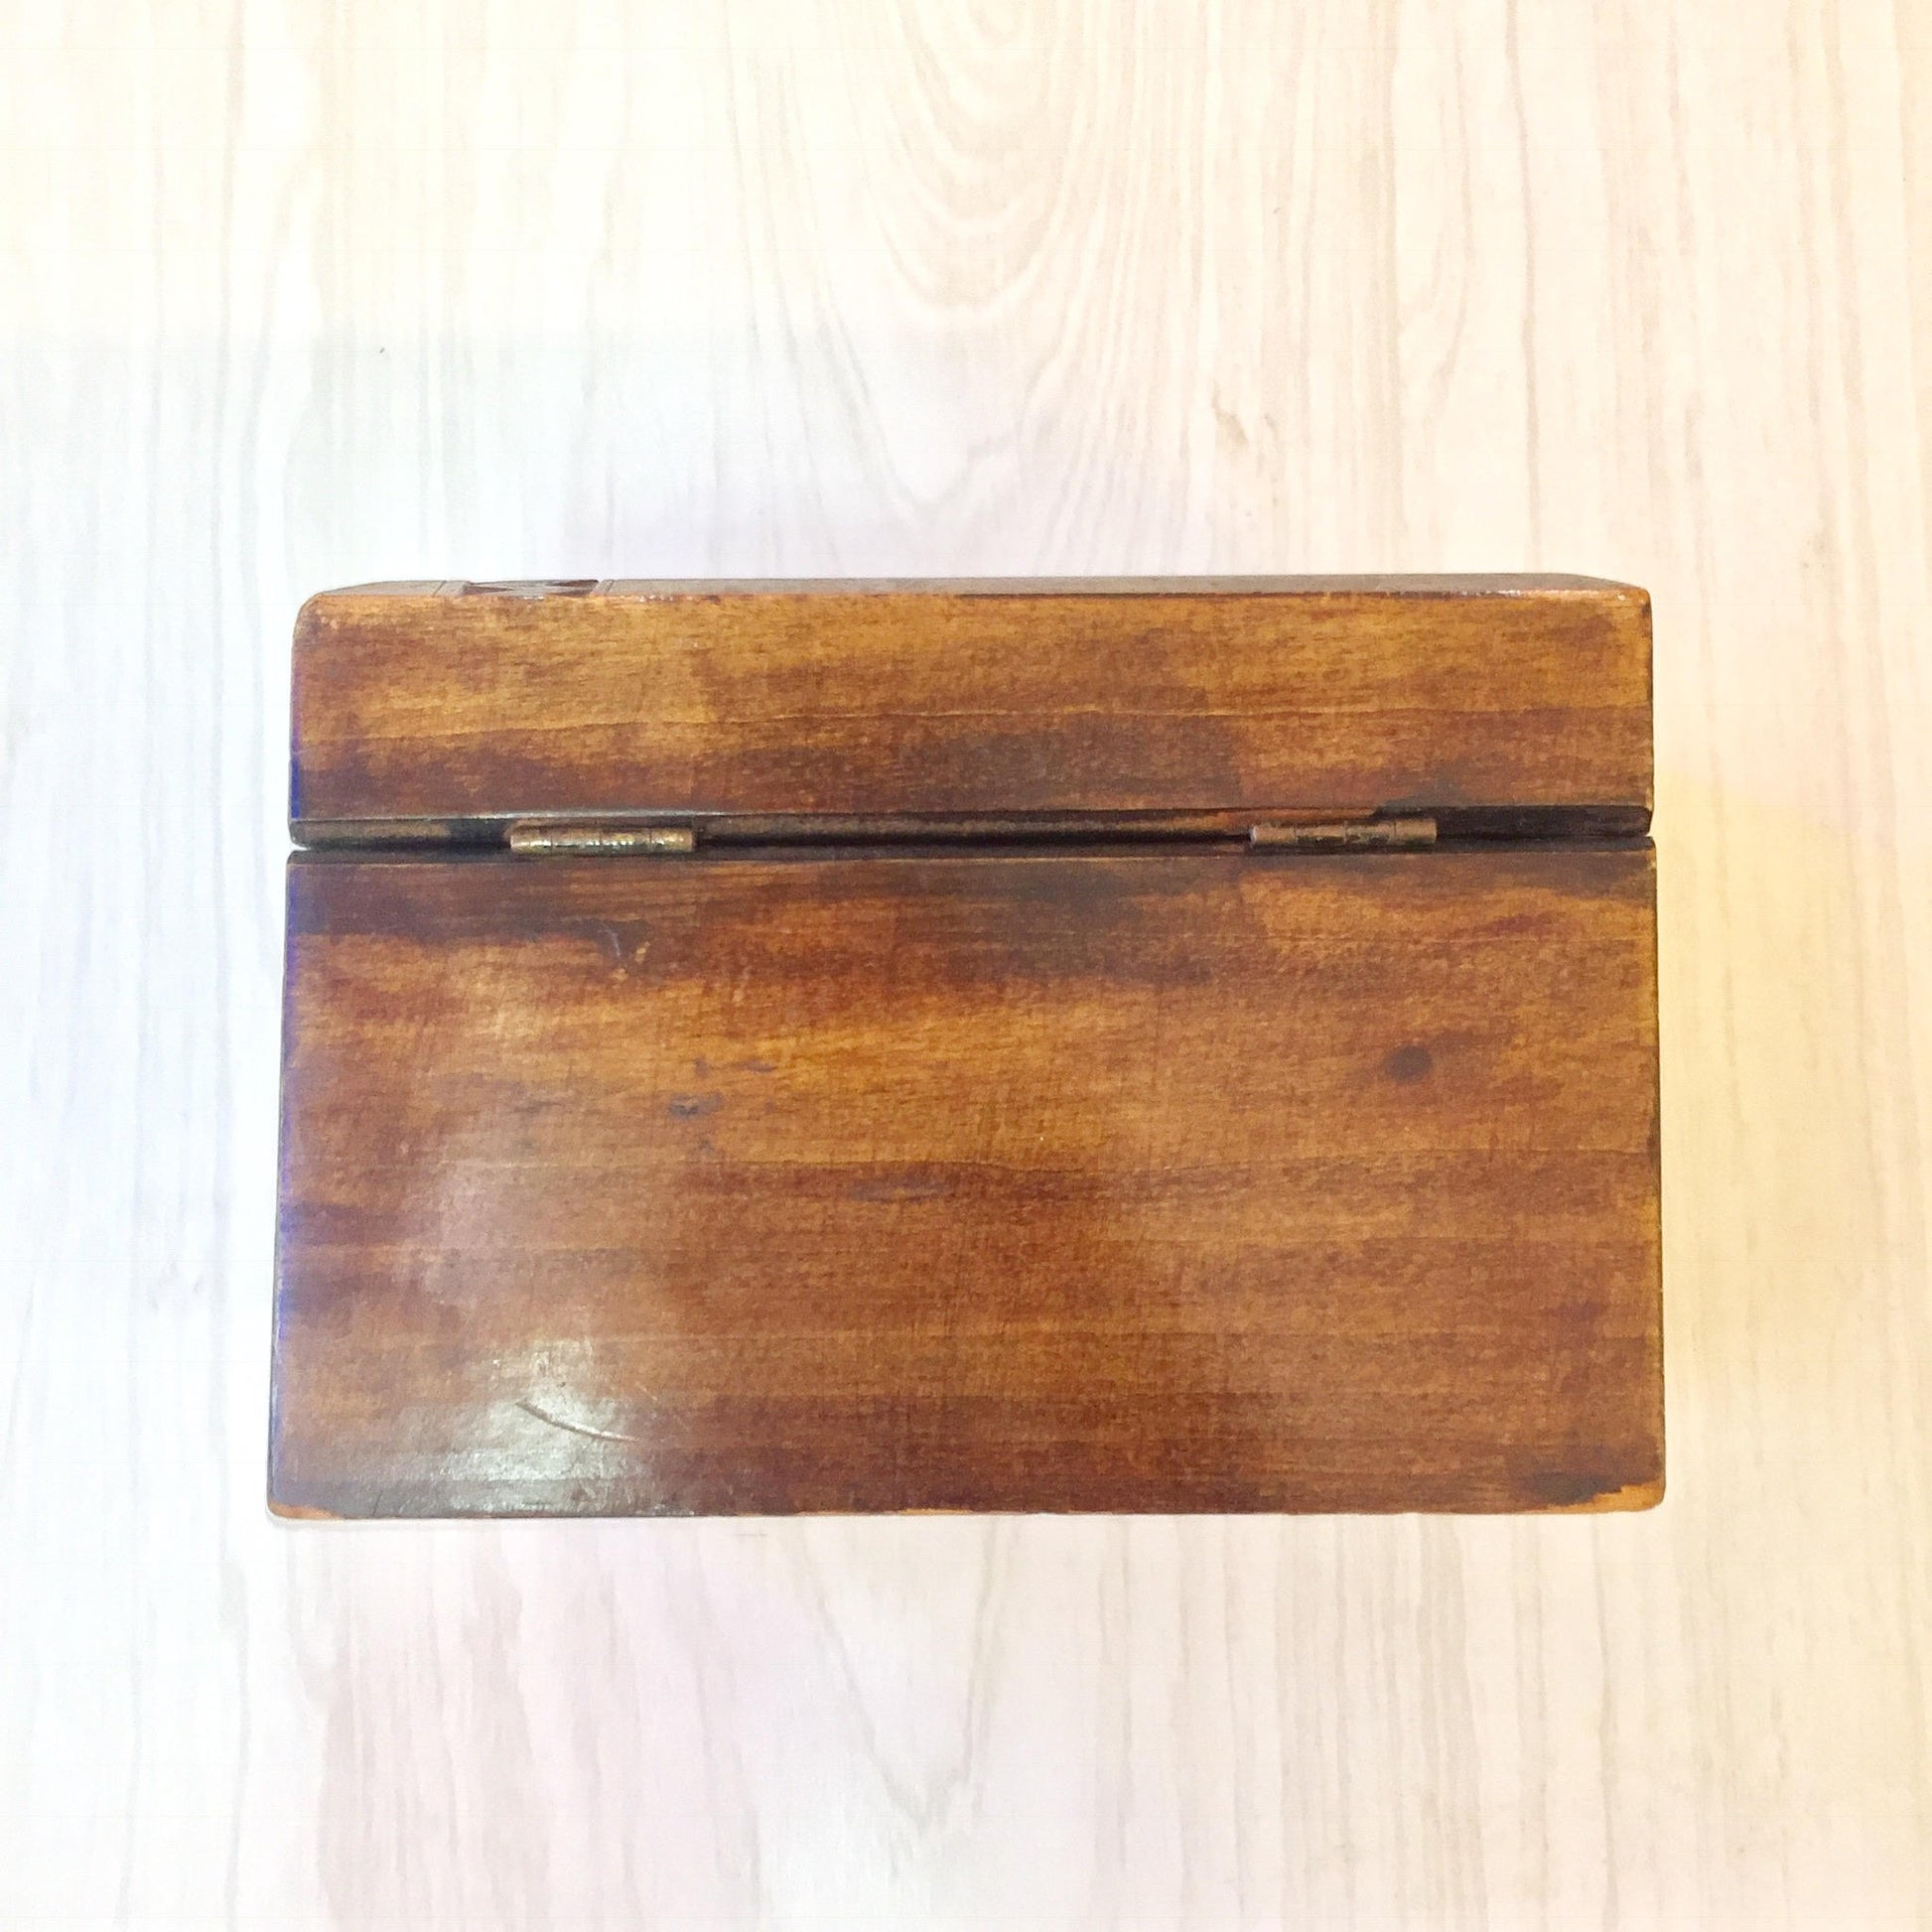 Antique wooden box with hinged lid, hand carved from darkened wood with smooth finish and natural wood grain texture visible, photographed on light wood background